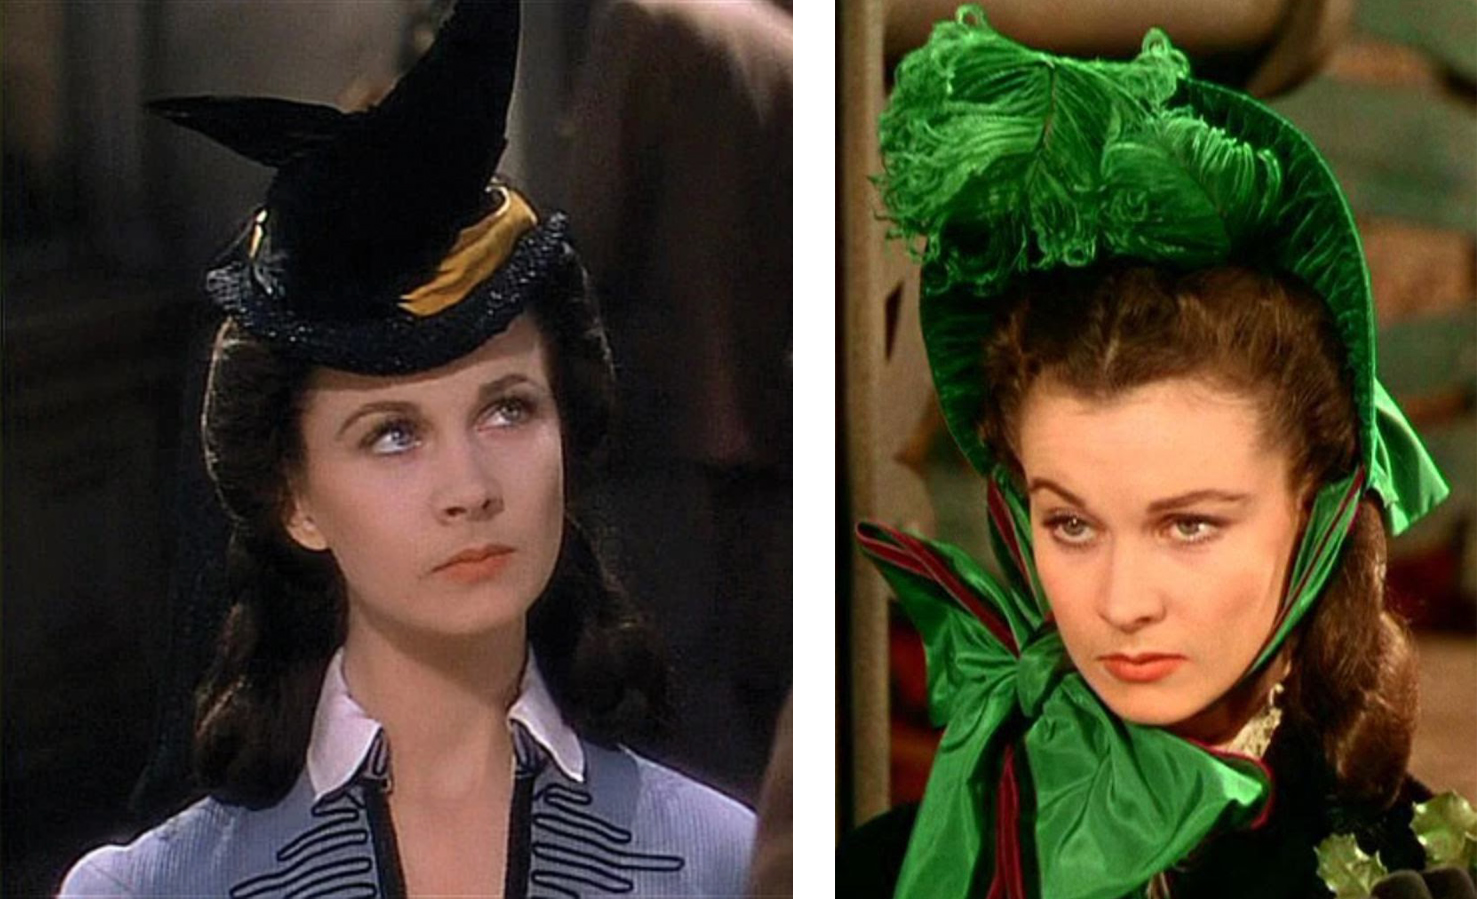 Two stills from film Gone with the Wind, showing actor Vivien Leigh wearing a black hat and a green hat with a feather on top, with a big bow tied under her chin 